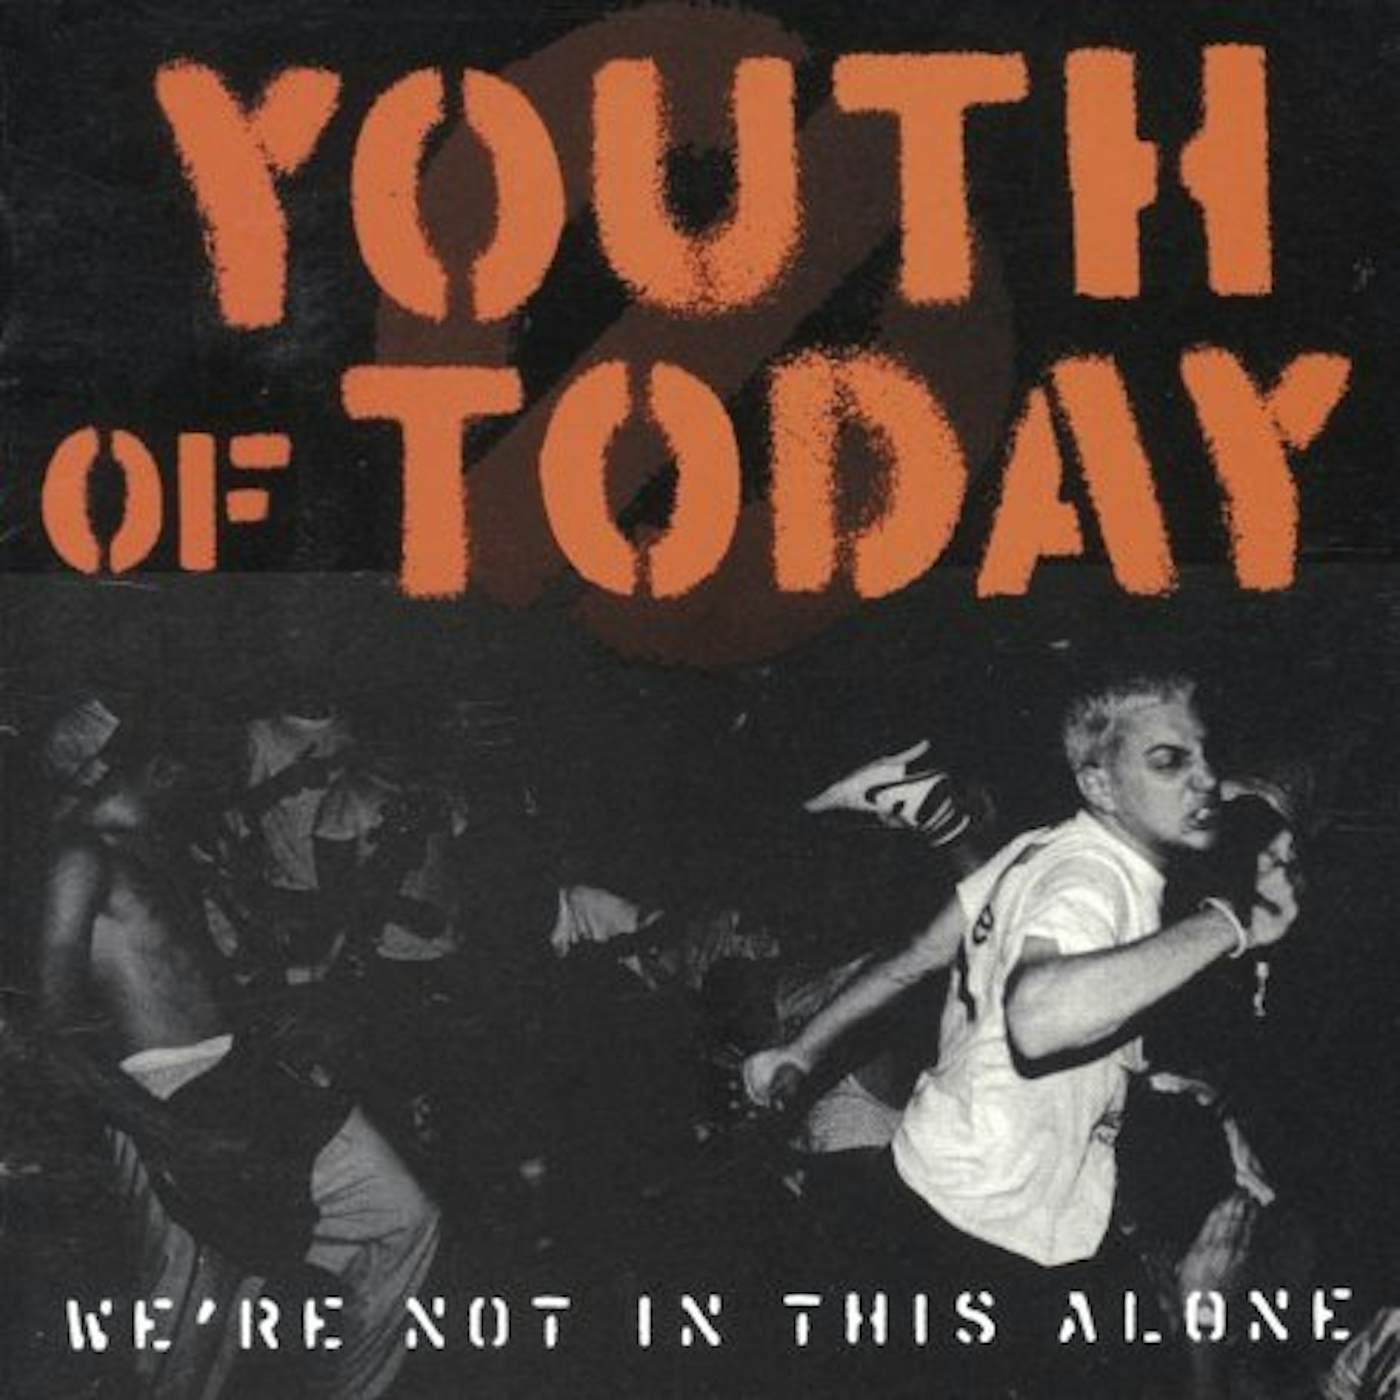 Youth Of Today WE'RE NOT IN THIS ALONE CD